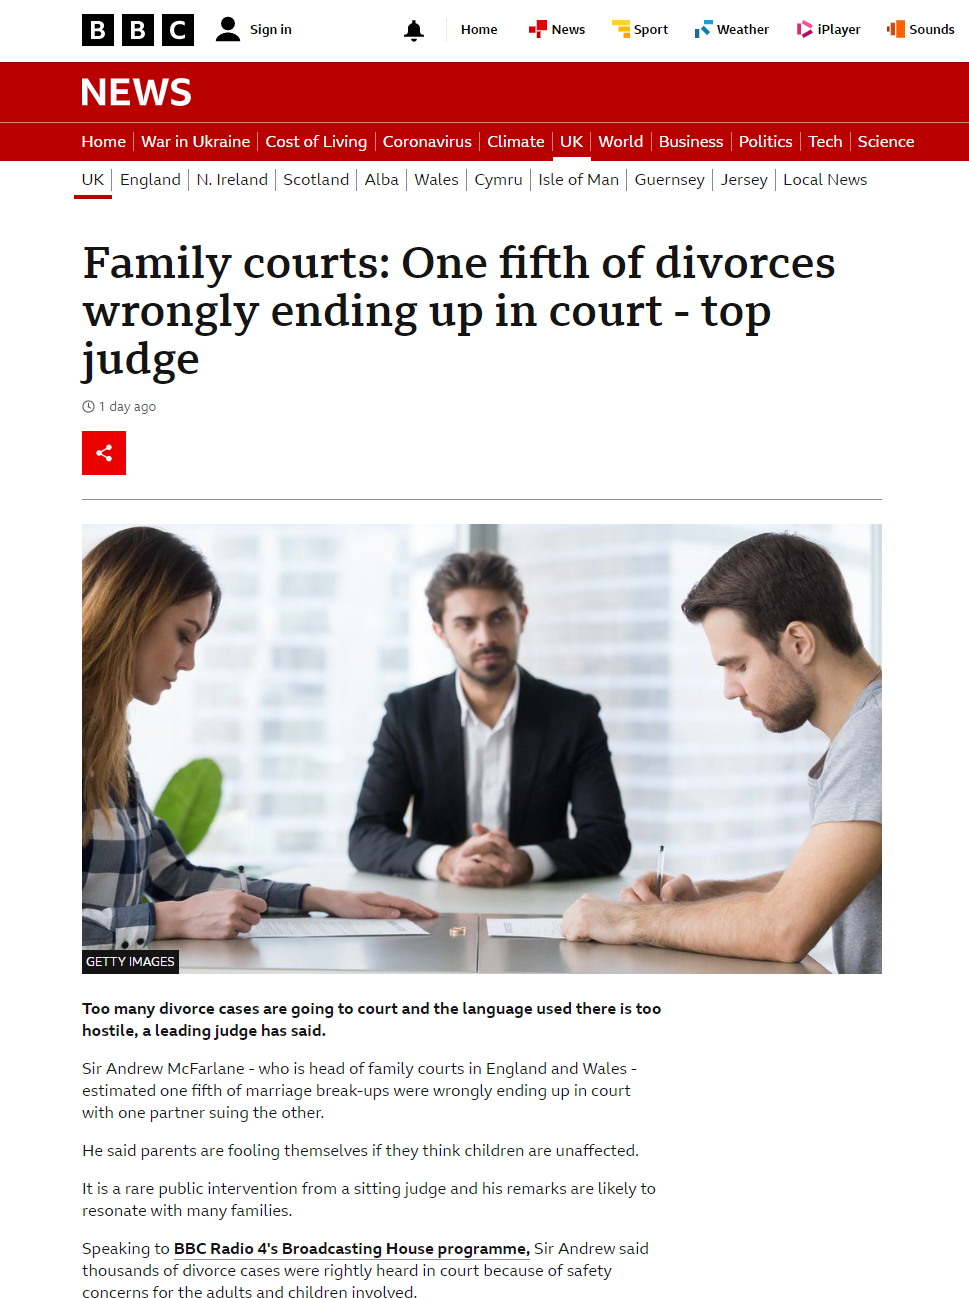 Family courts: One fifth of divorces wrongly ending up in court - top judge